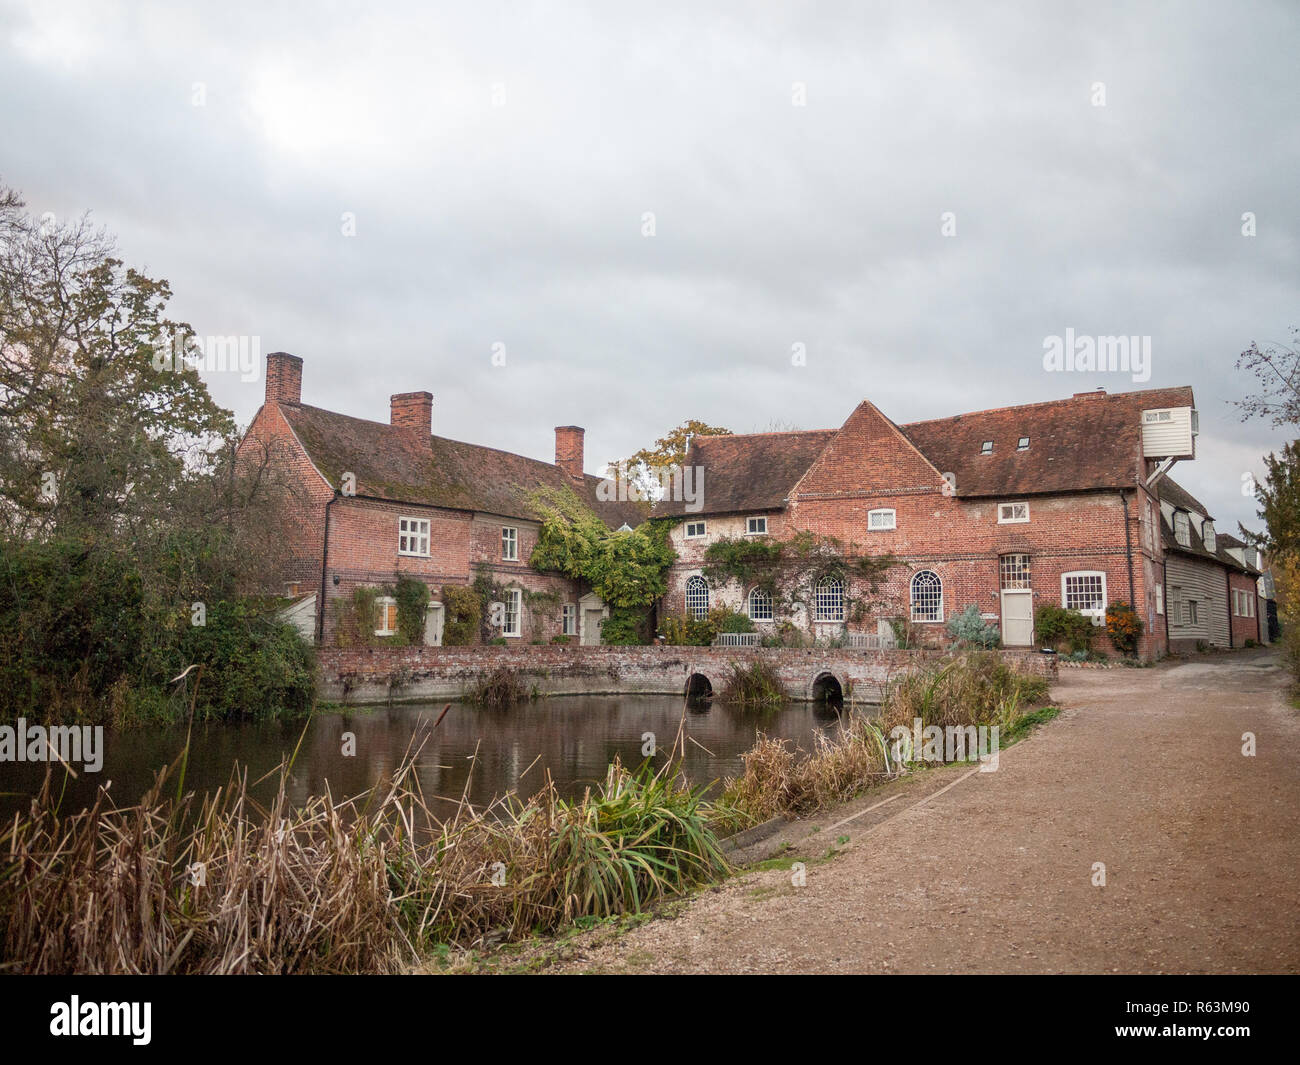 flatford mill building old historical red brick constable country country mill house estate Stock Photo